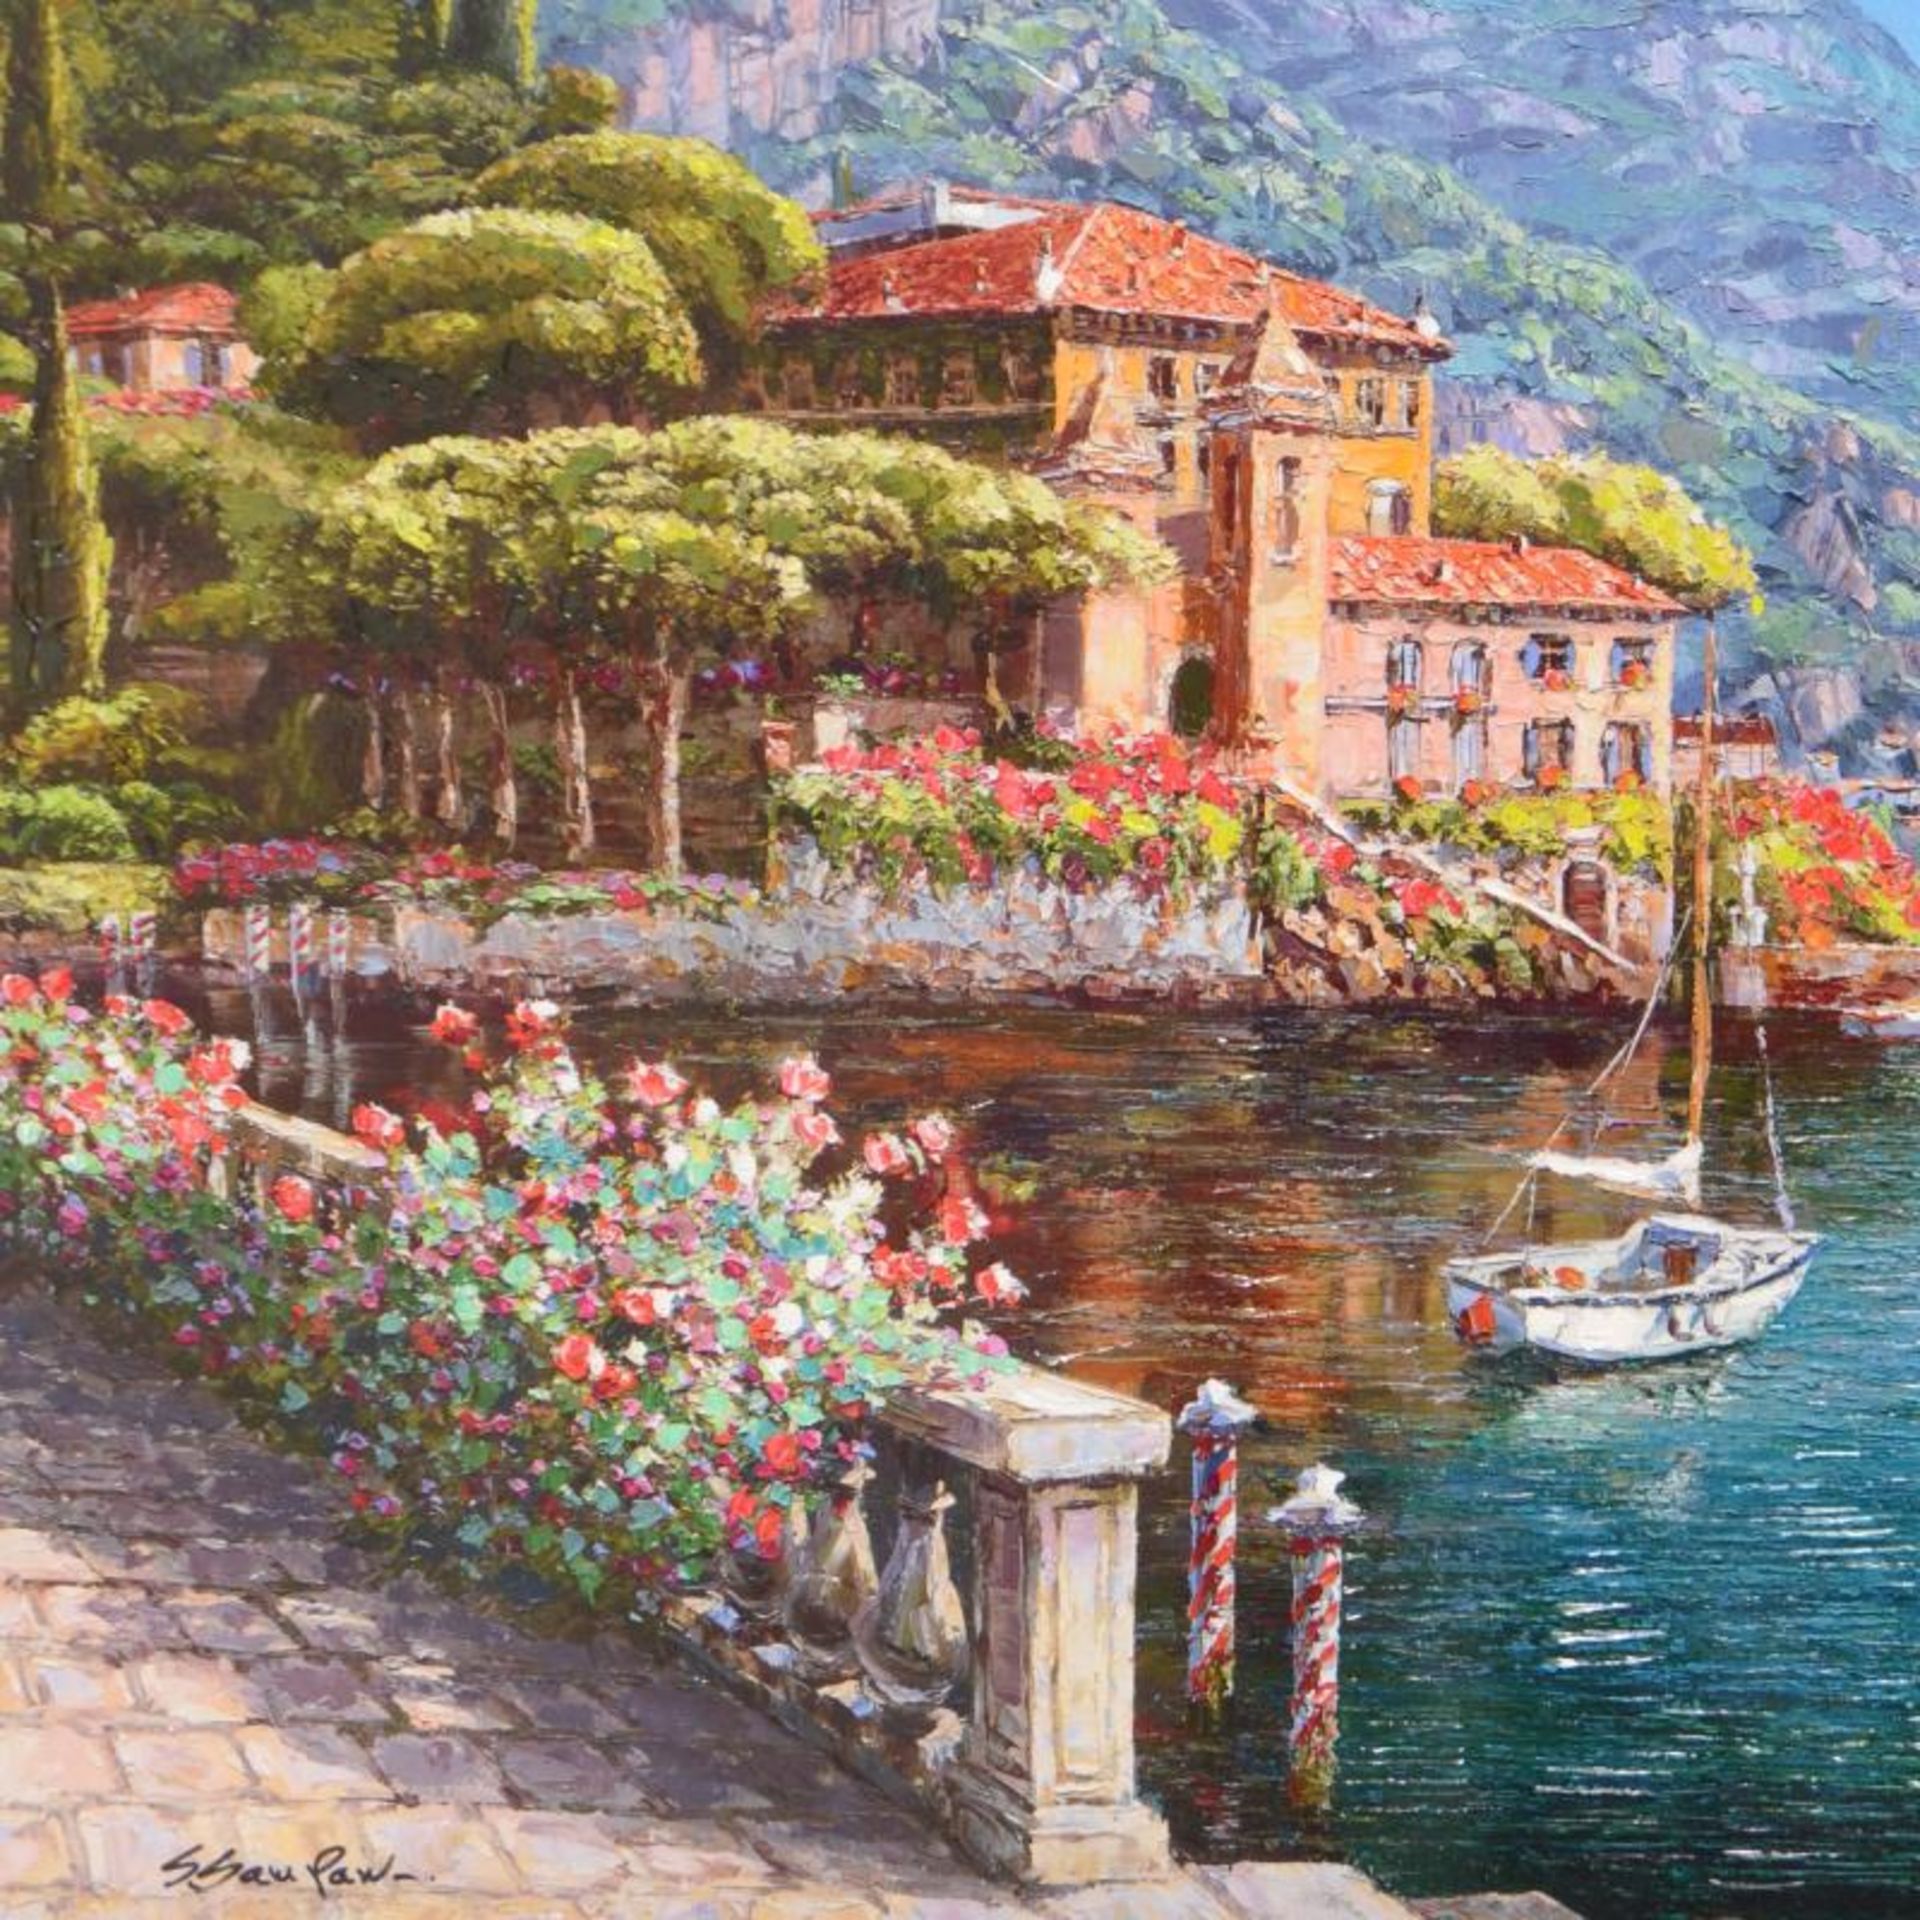 Sam Park, "Abbey Bellagio" Hand Embellished Limited Edition Serigraph on Canvas, - Image 2 of 2